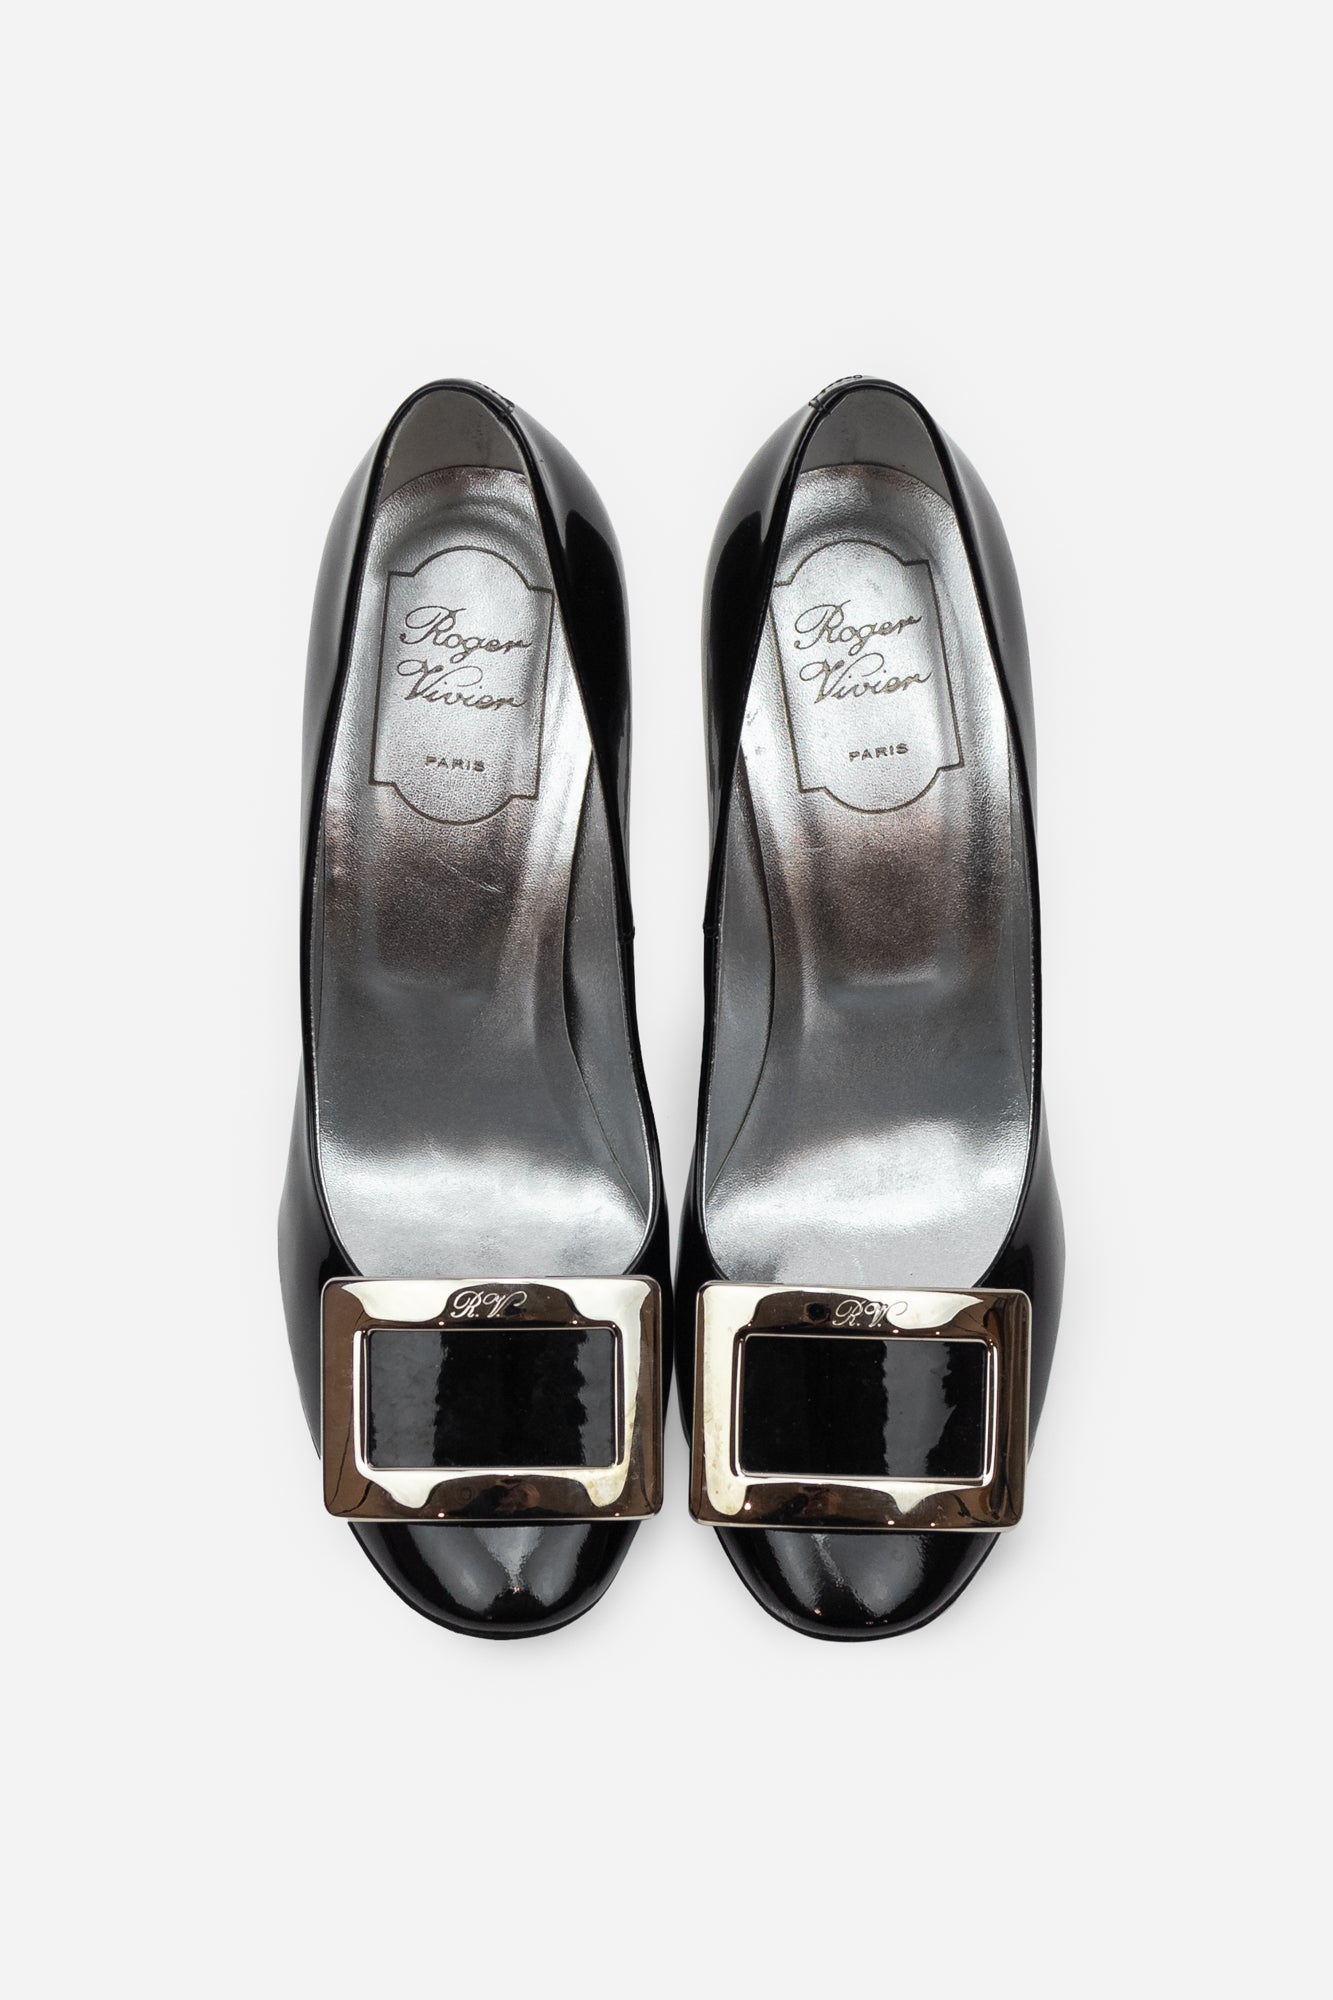 Black Patent Pumps With Silver Buckle